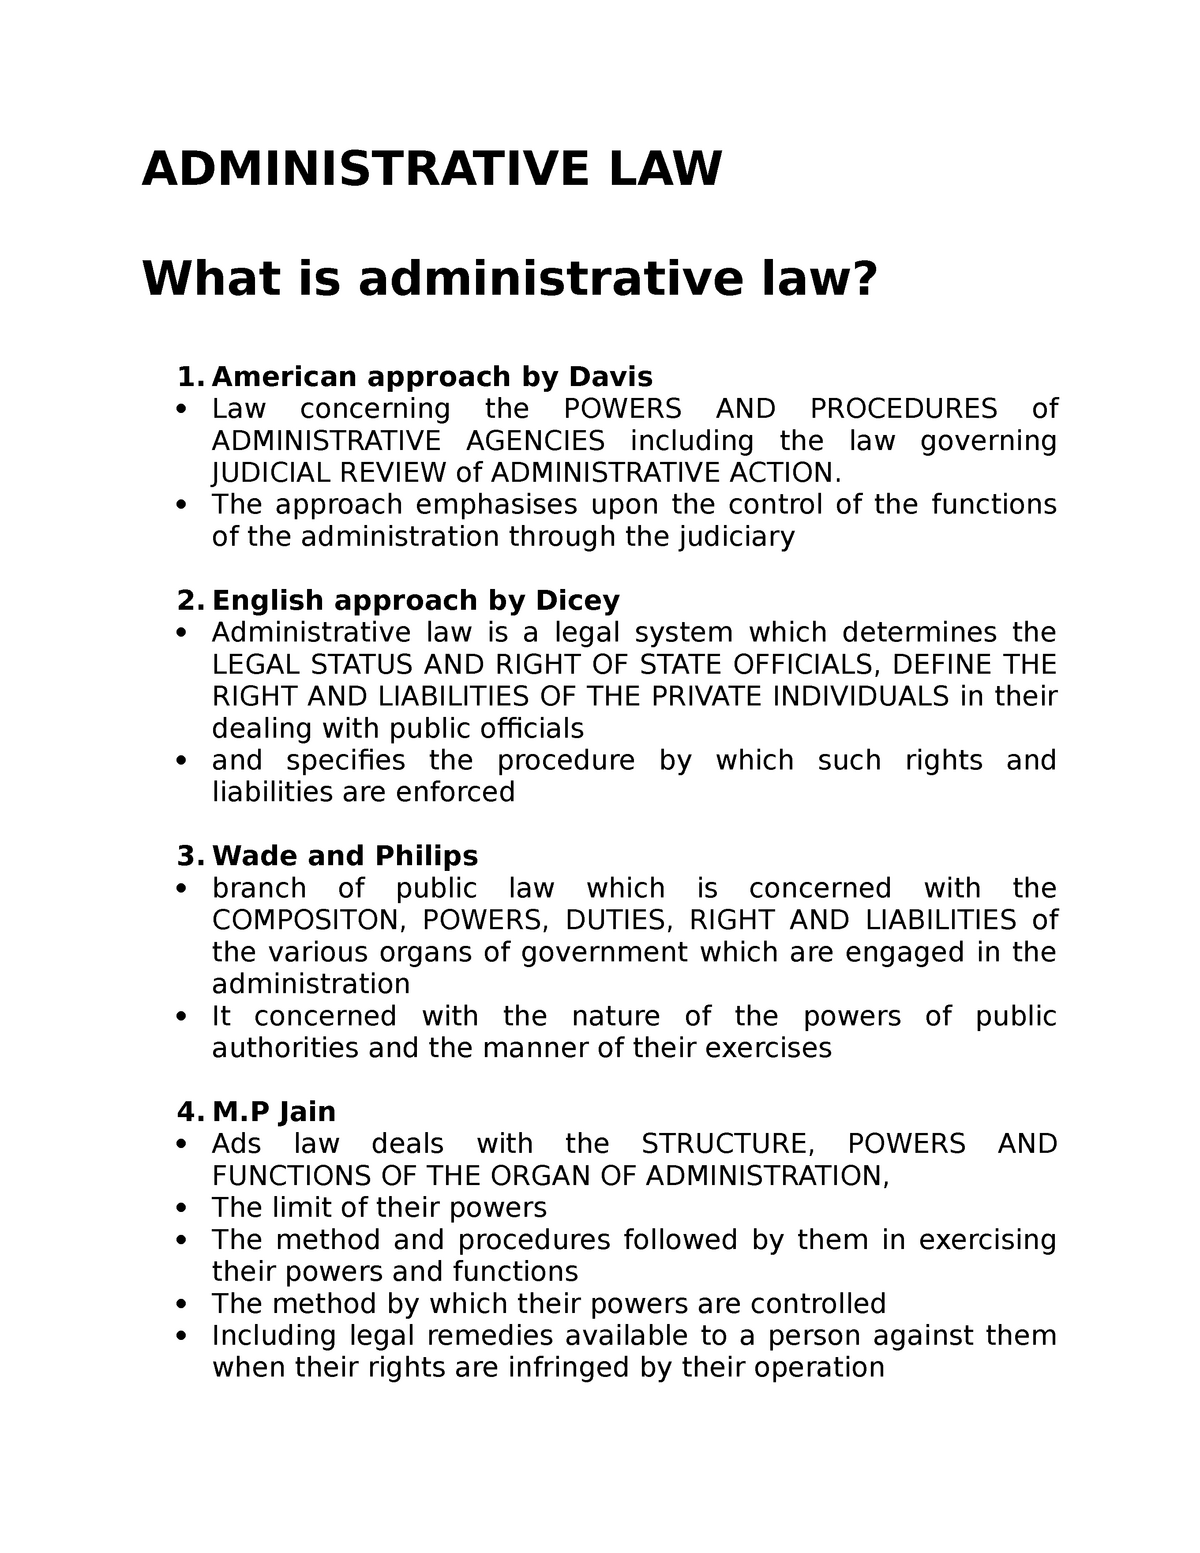 assignment on administrative law